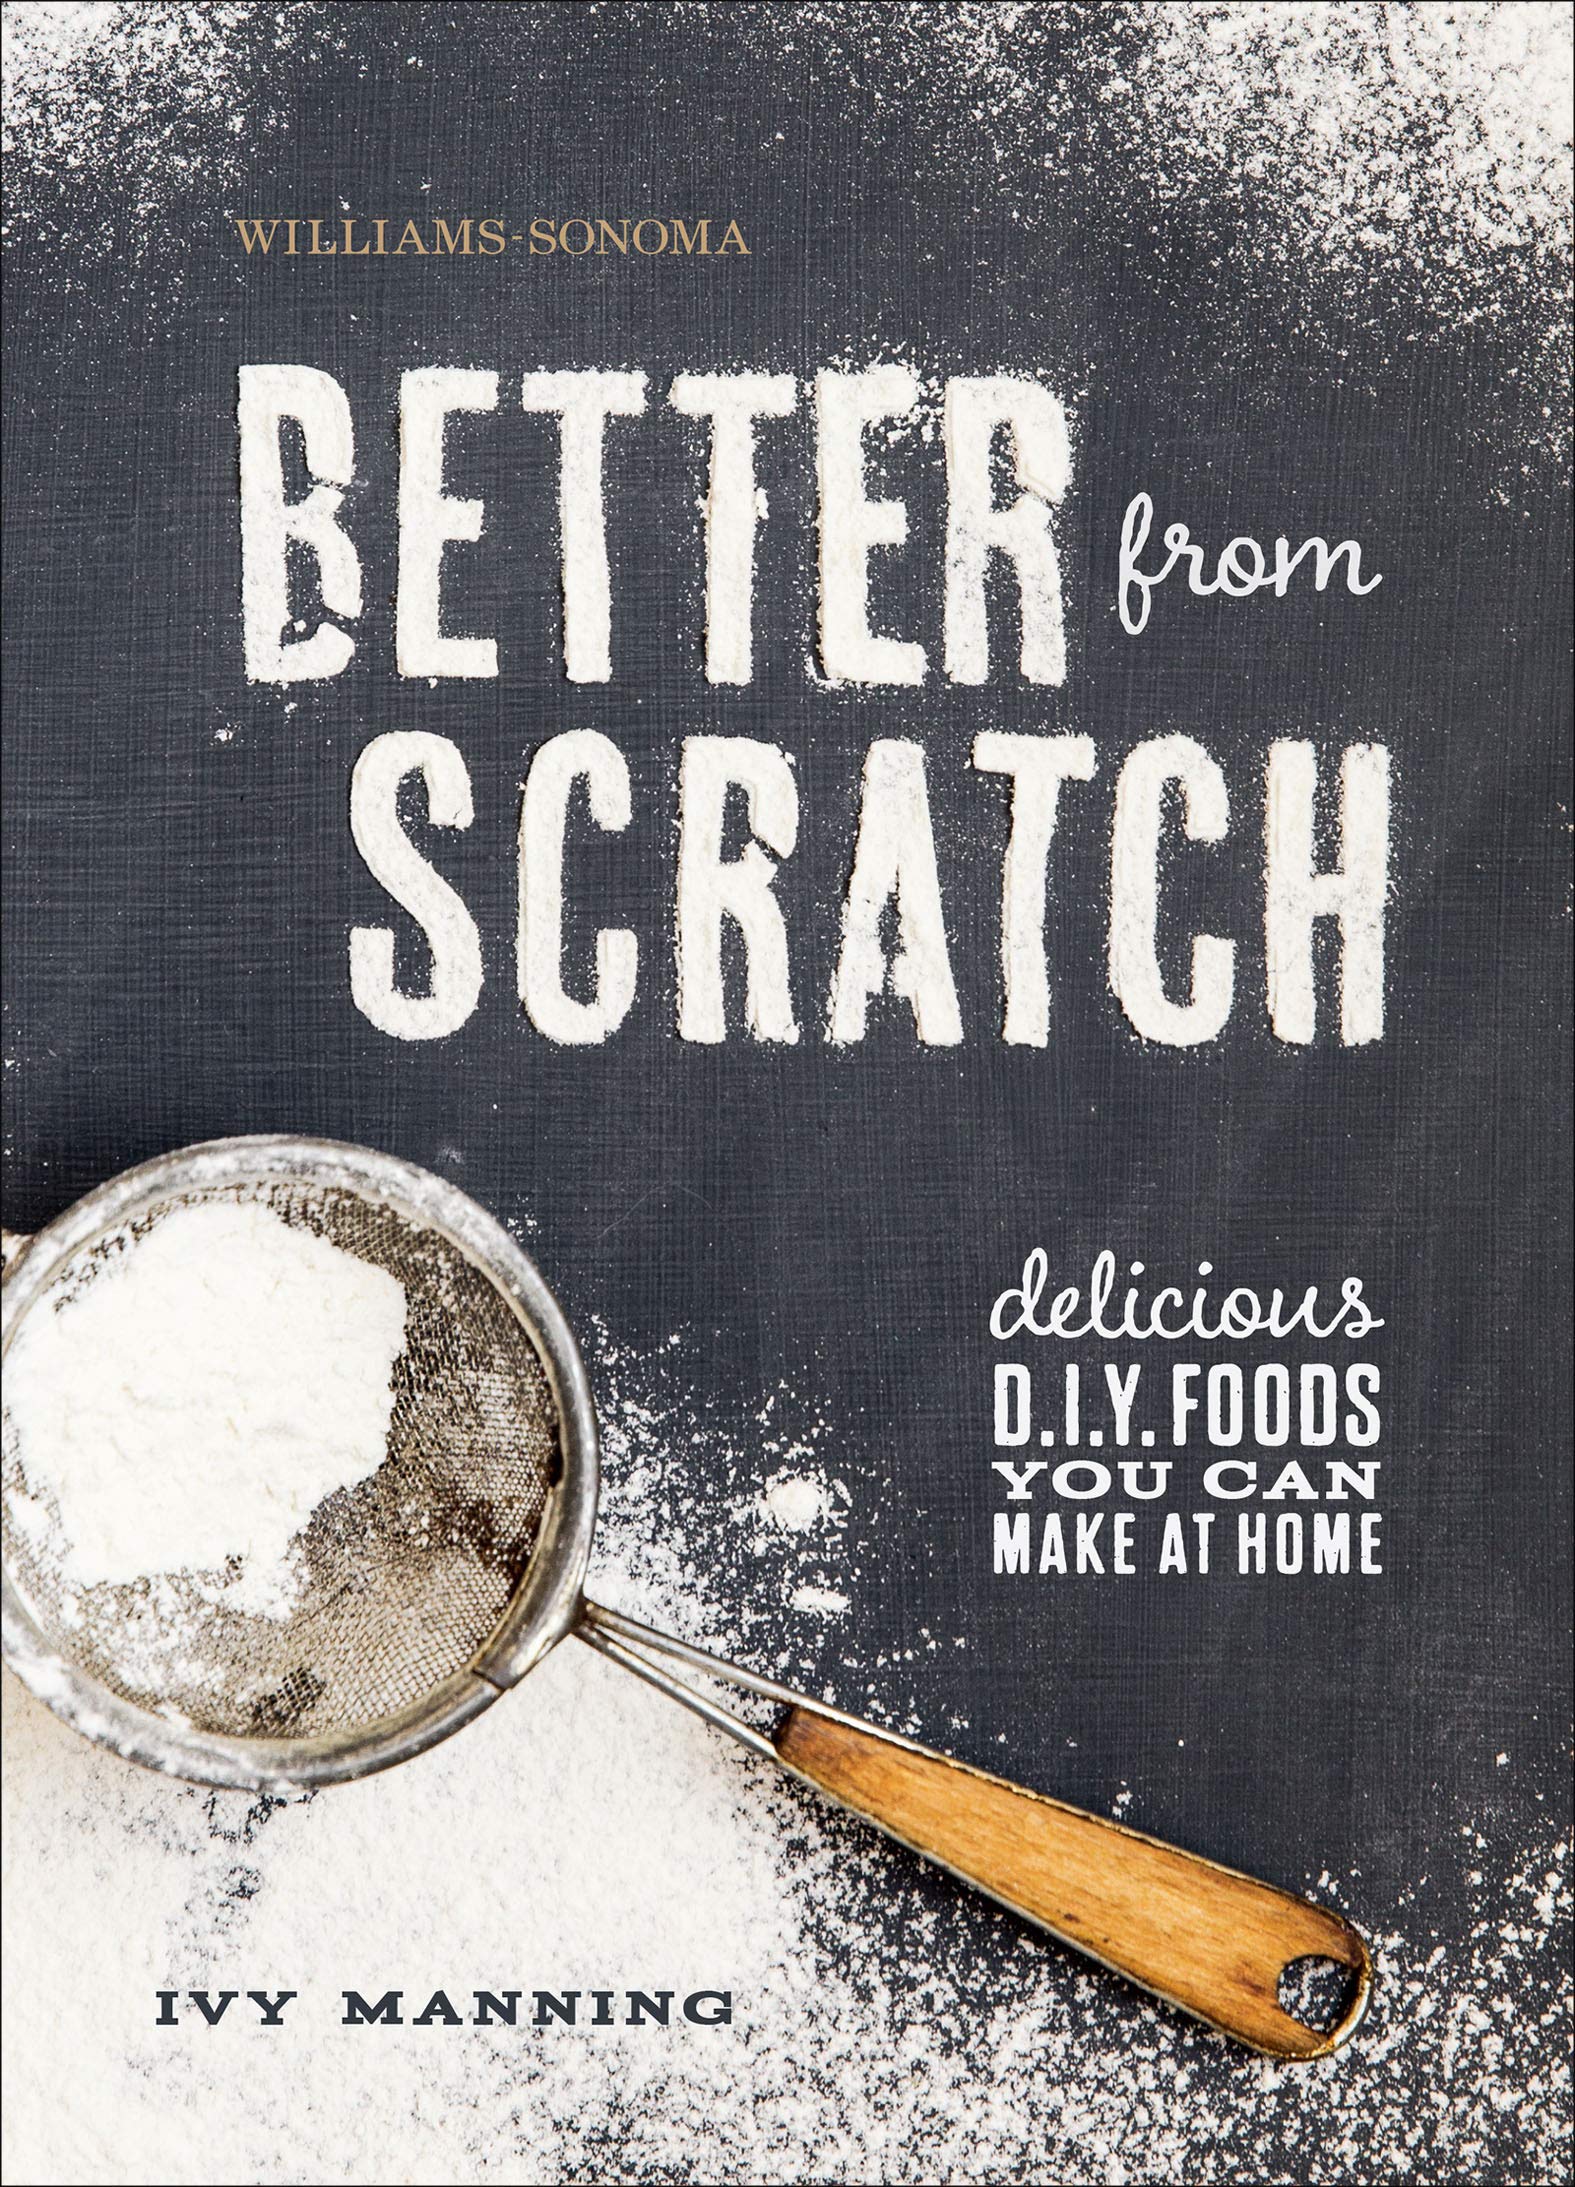 Better from Scratch: Delicious D.I.Y. Foods You Can Make at Home (Williams-Sonoma)